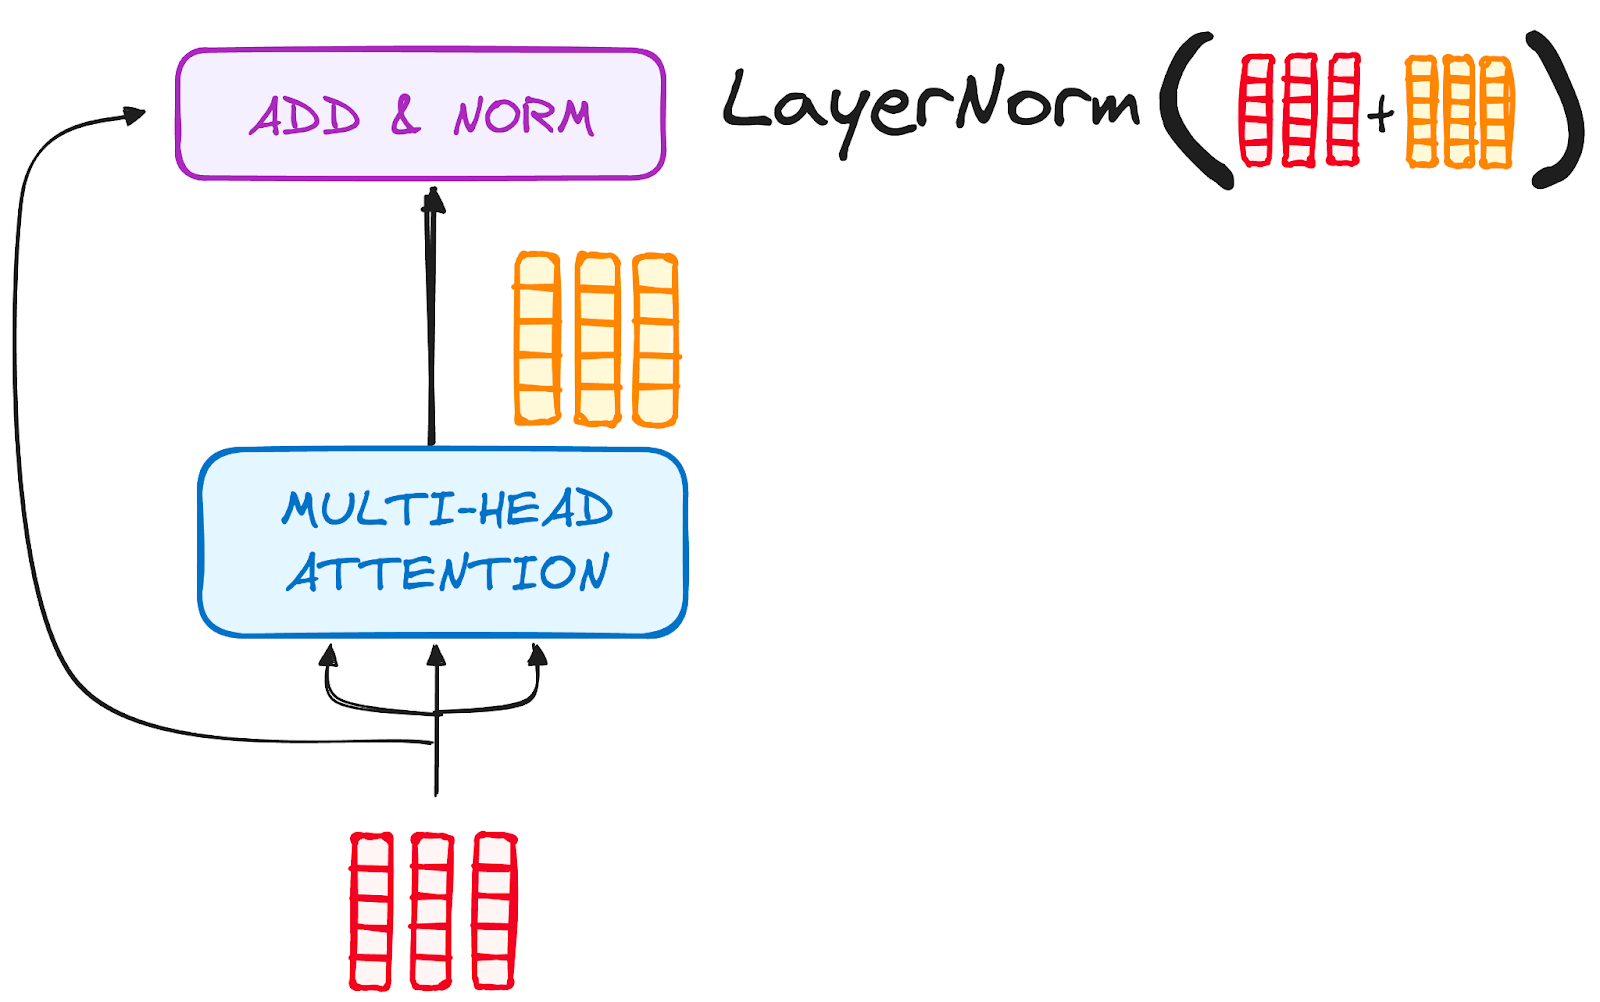 Encoder’s workflow. Normalization and residual connection after Multi-Head Attention.